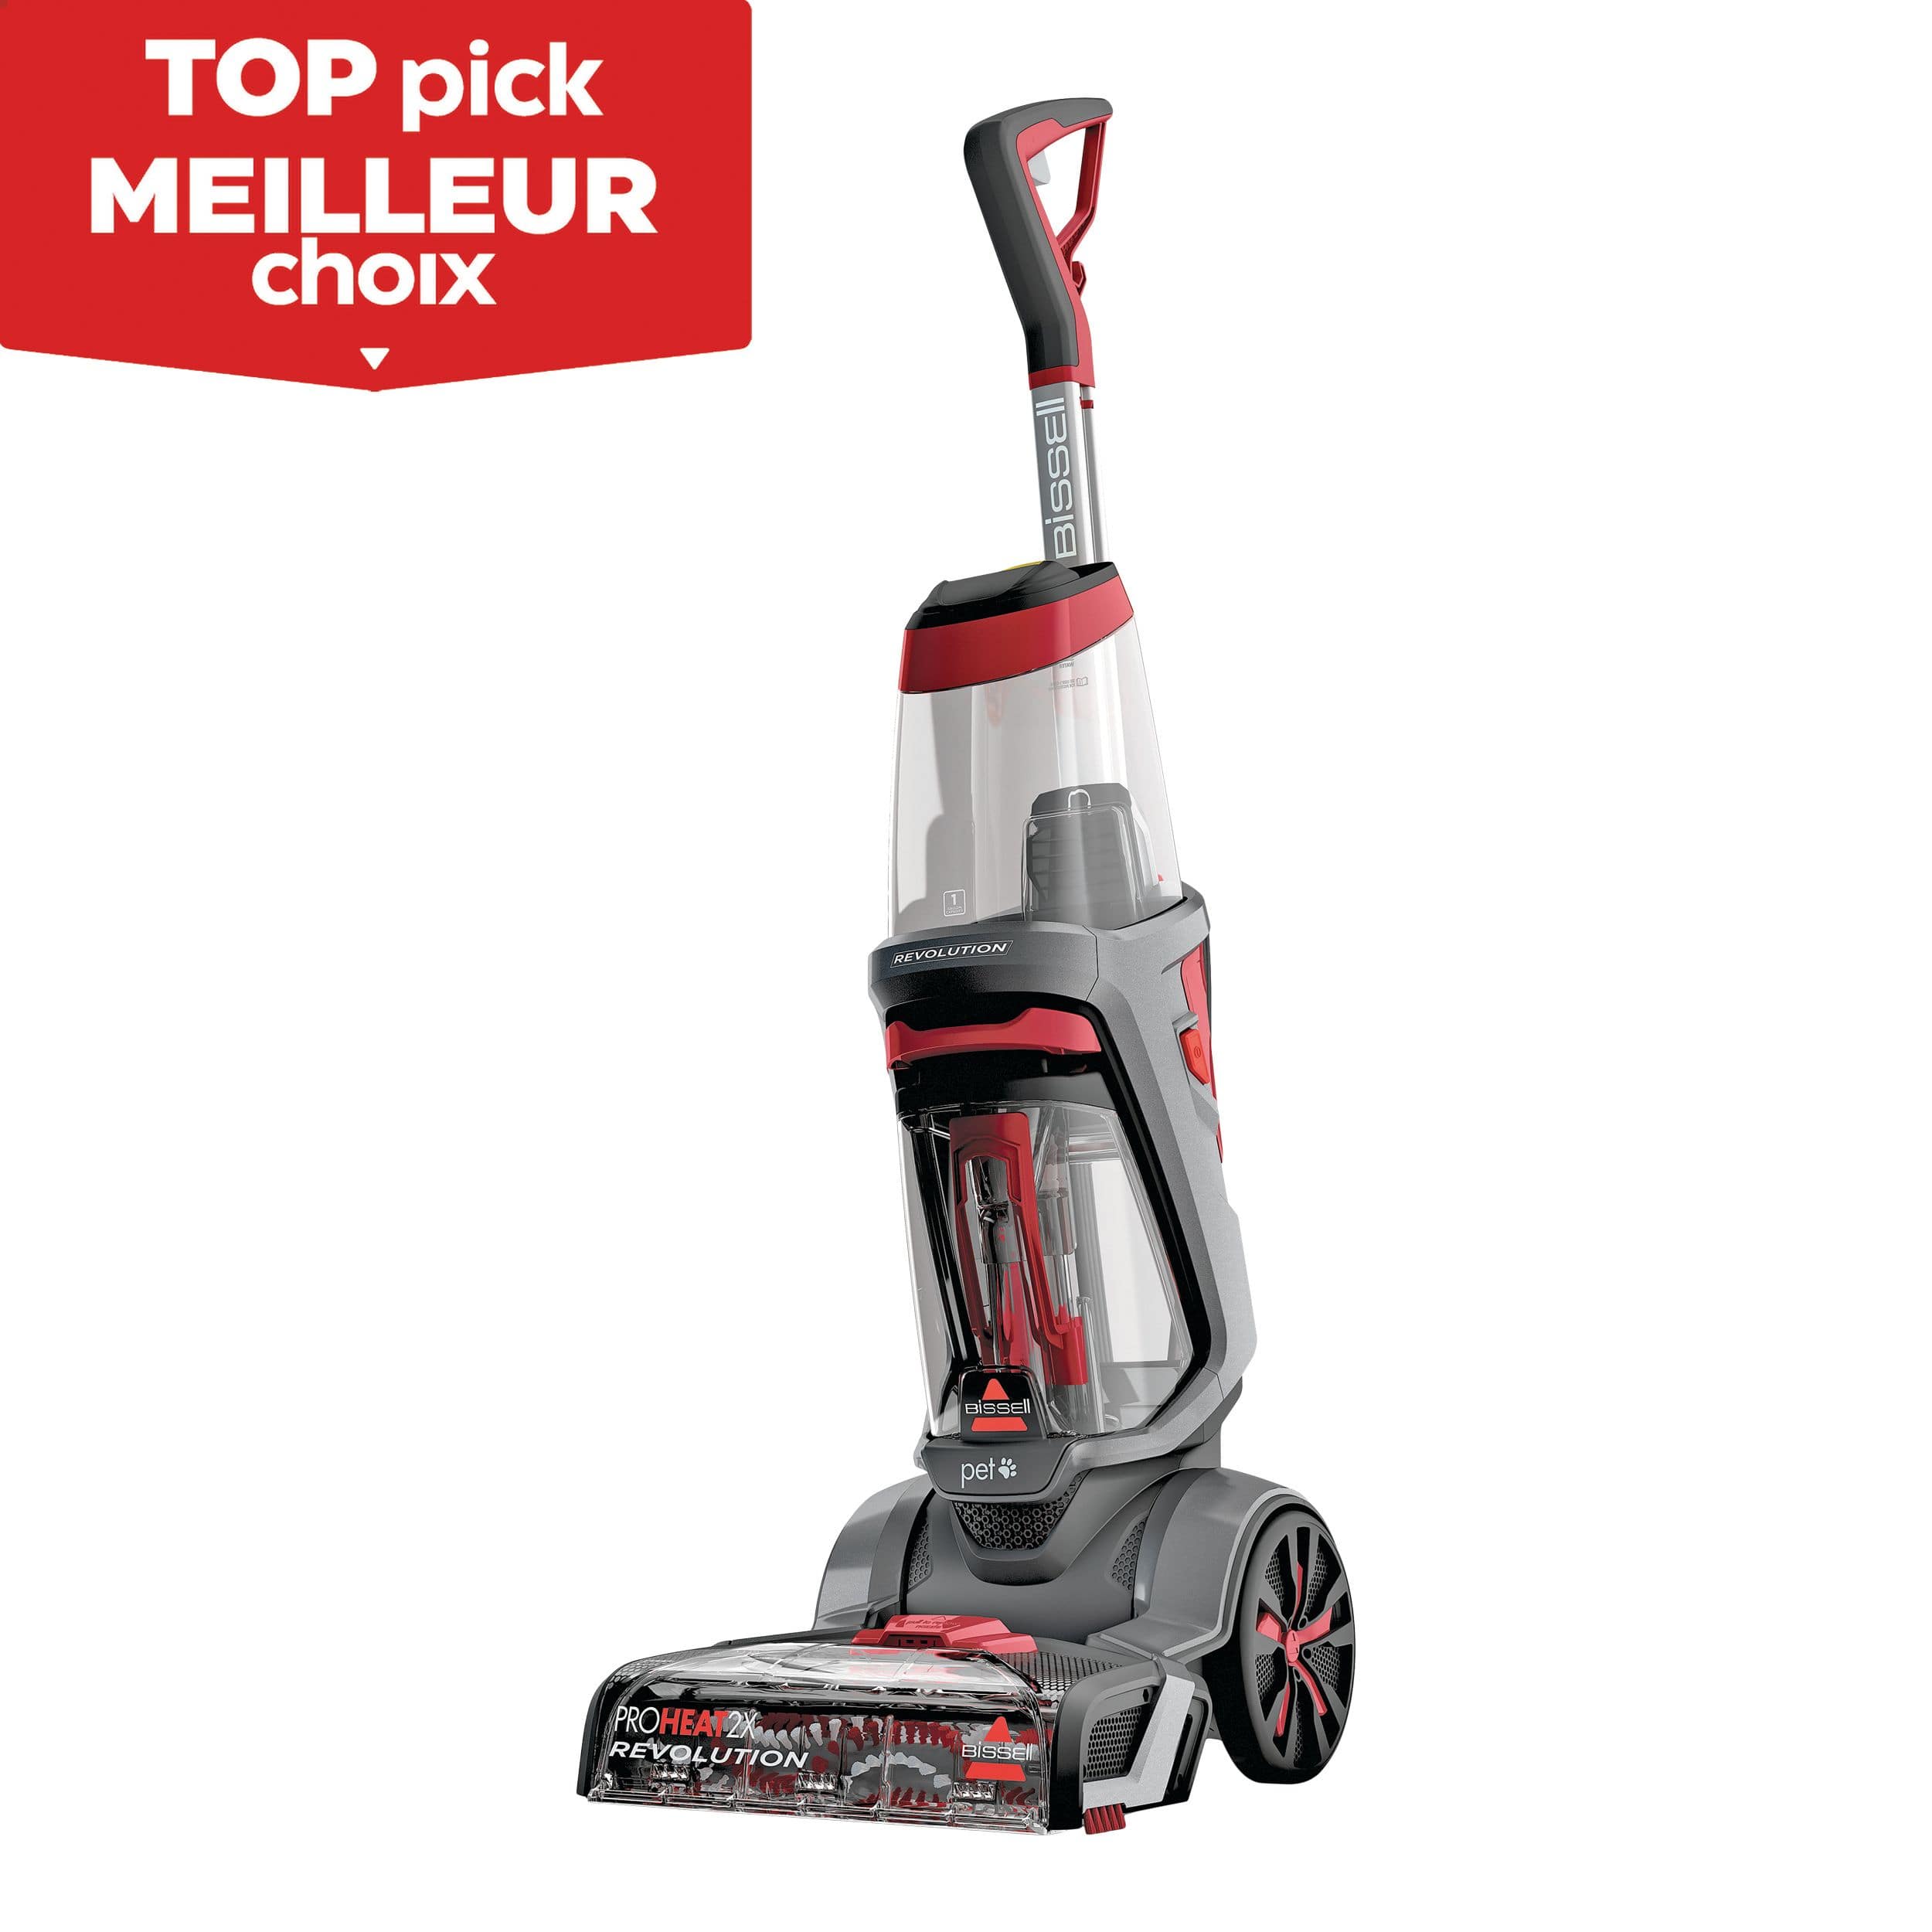 https://media-www.canadiantire.ca/product/living/cleaning/vacuums-and-floorcare/0437834/bissell-proheat-2x-revolution-pet-deep-cleaner-5f0319f9-4907-4767-b9f2-400d1ee3a782-jpgrendition.jpg